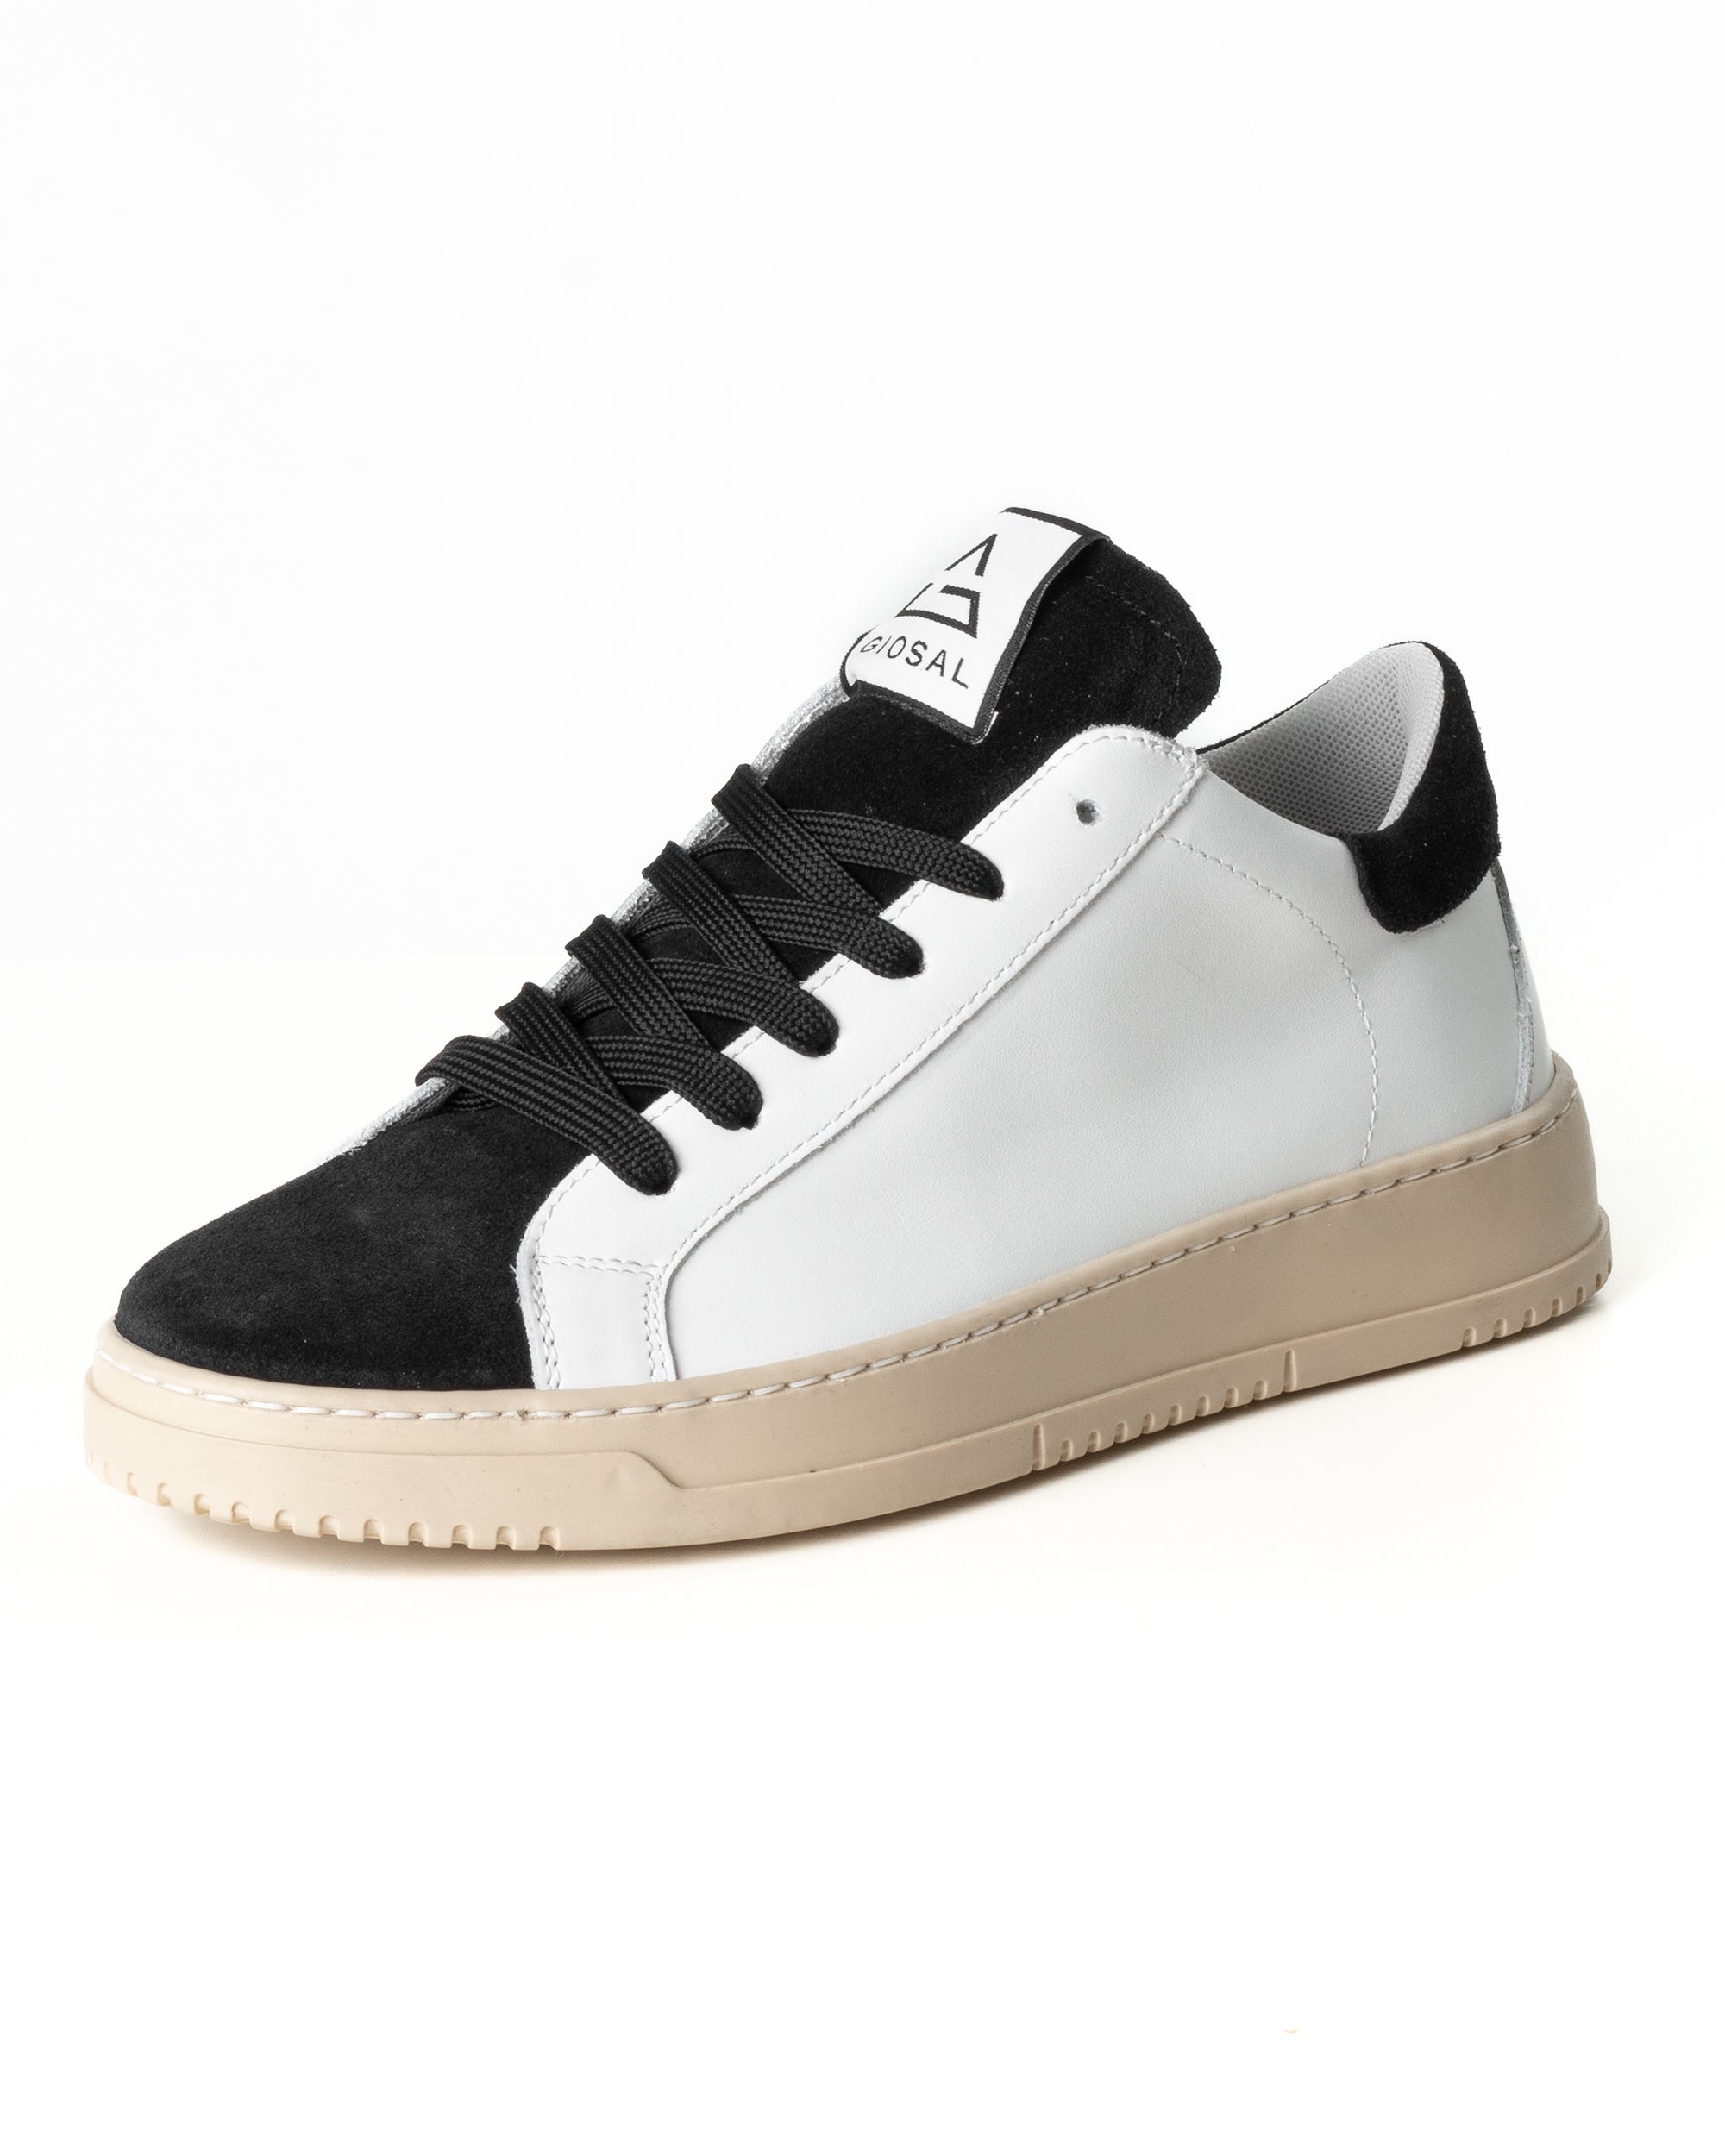 Men's Shoes White Casual Sports Sneakers Faux Leather Suede GIOSAL-S1185A